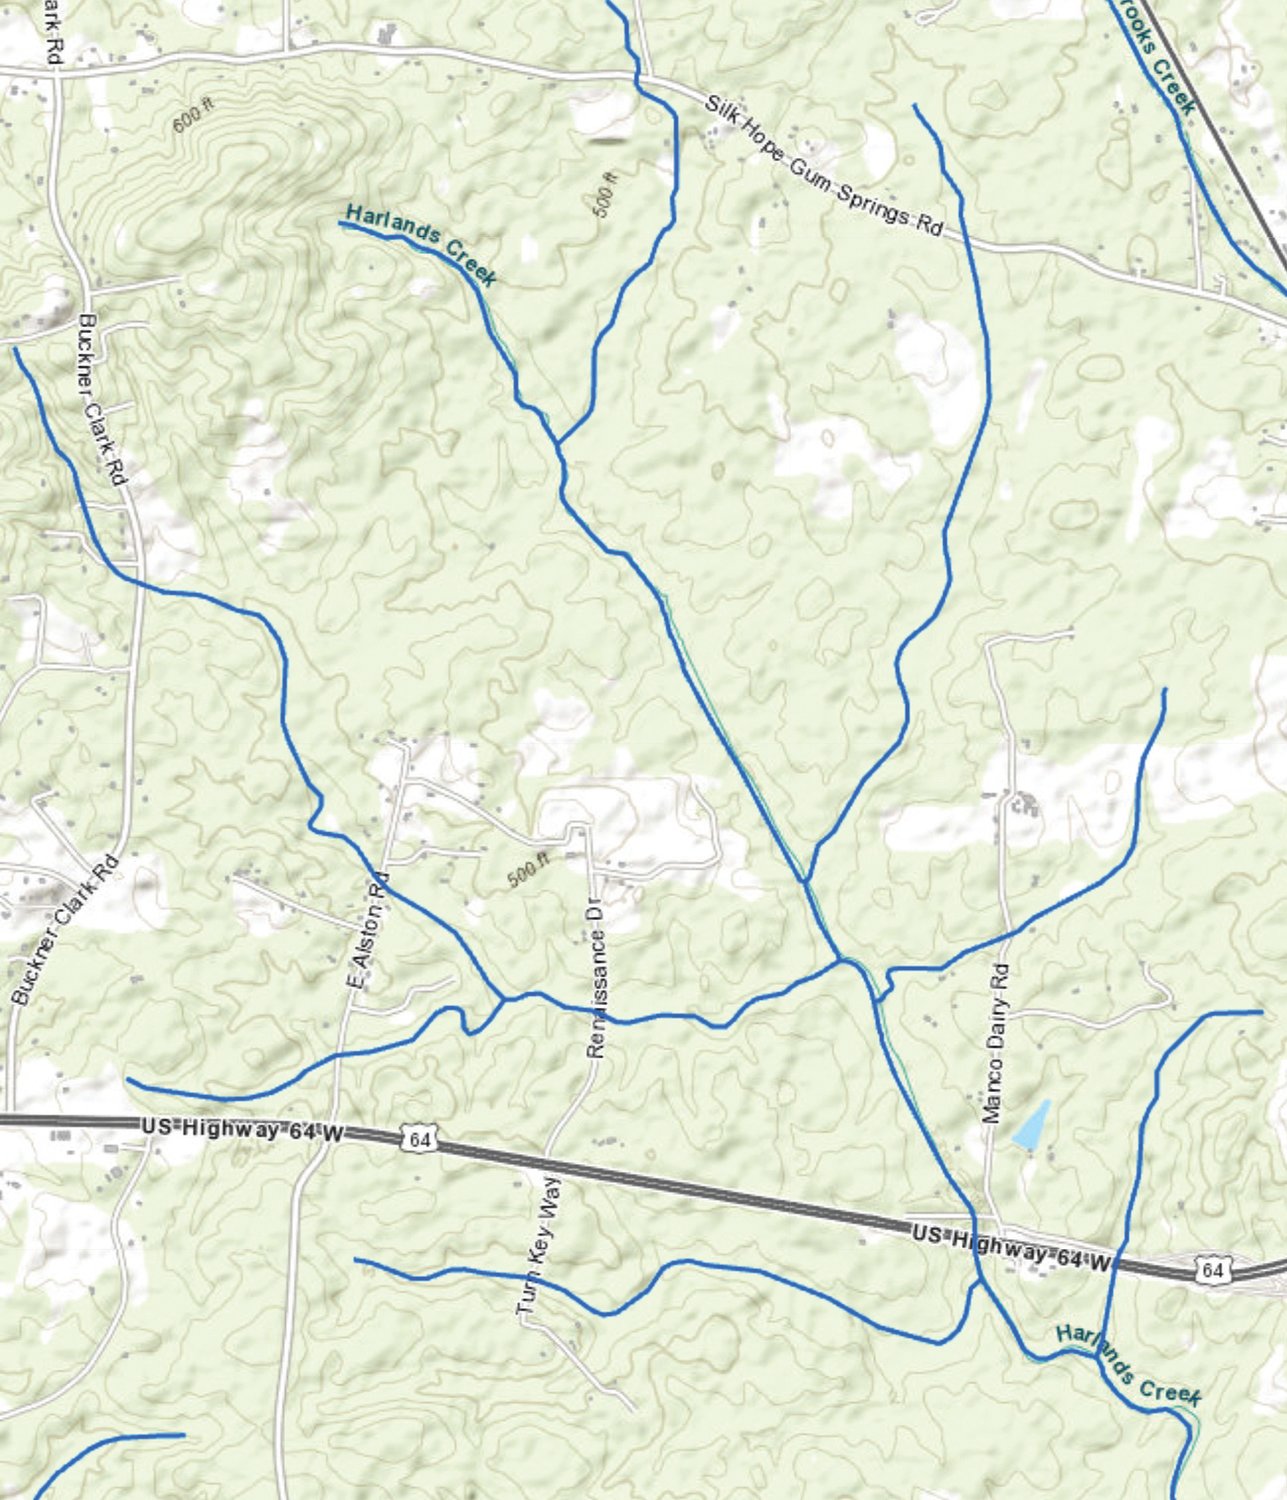 A map showing Harlands Creek, the site of a recent raw sewage spill in Pittsboro.